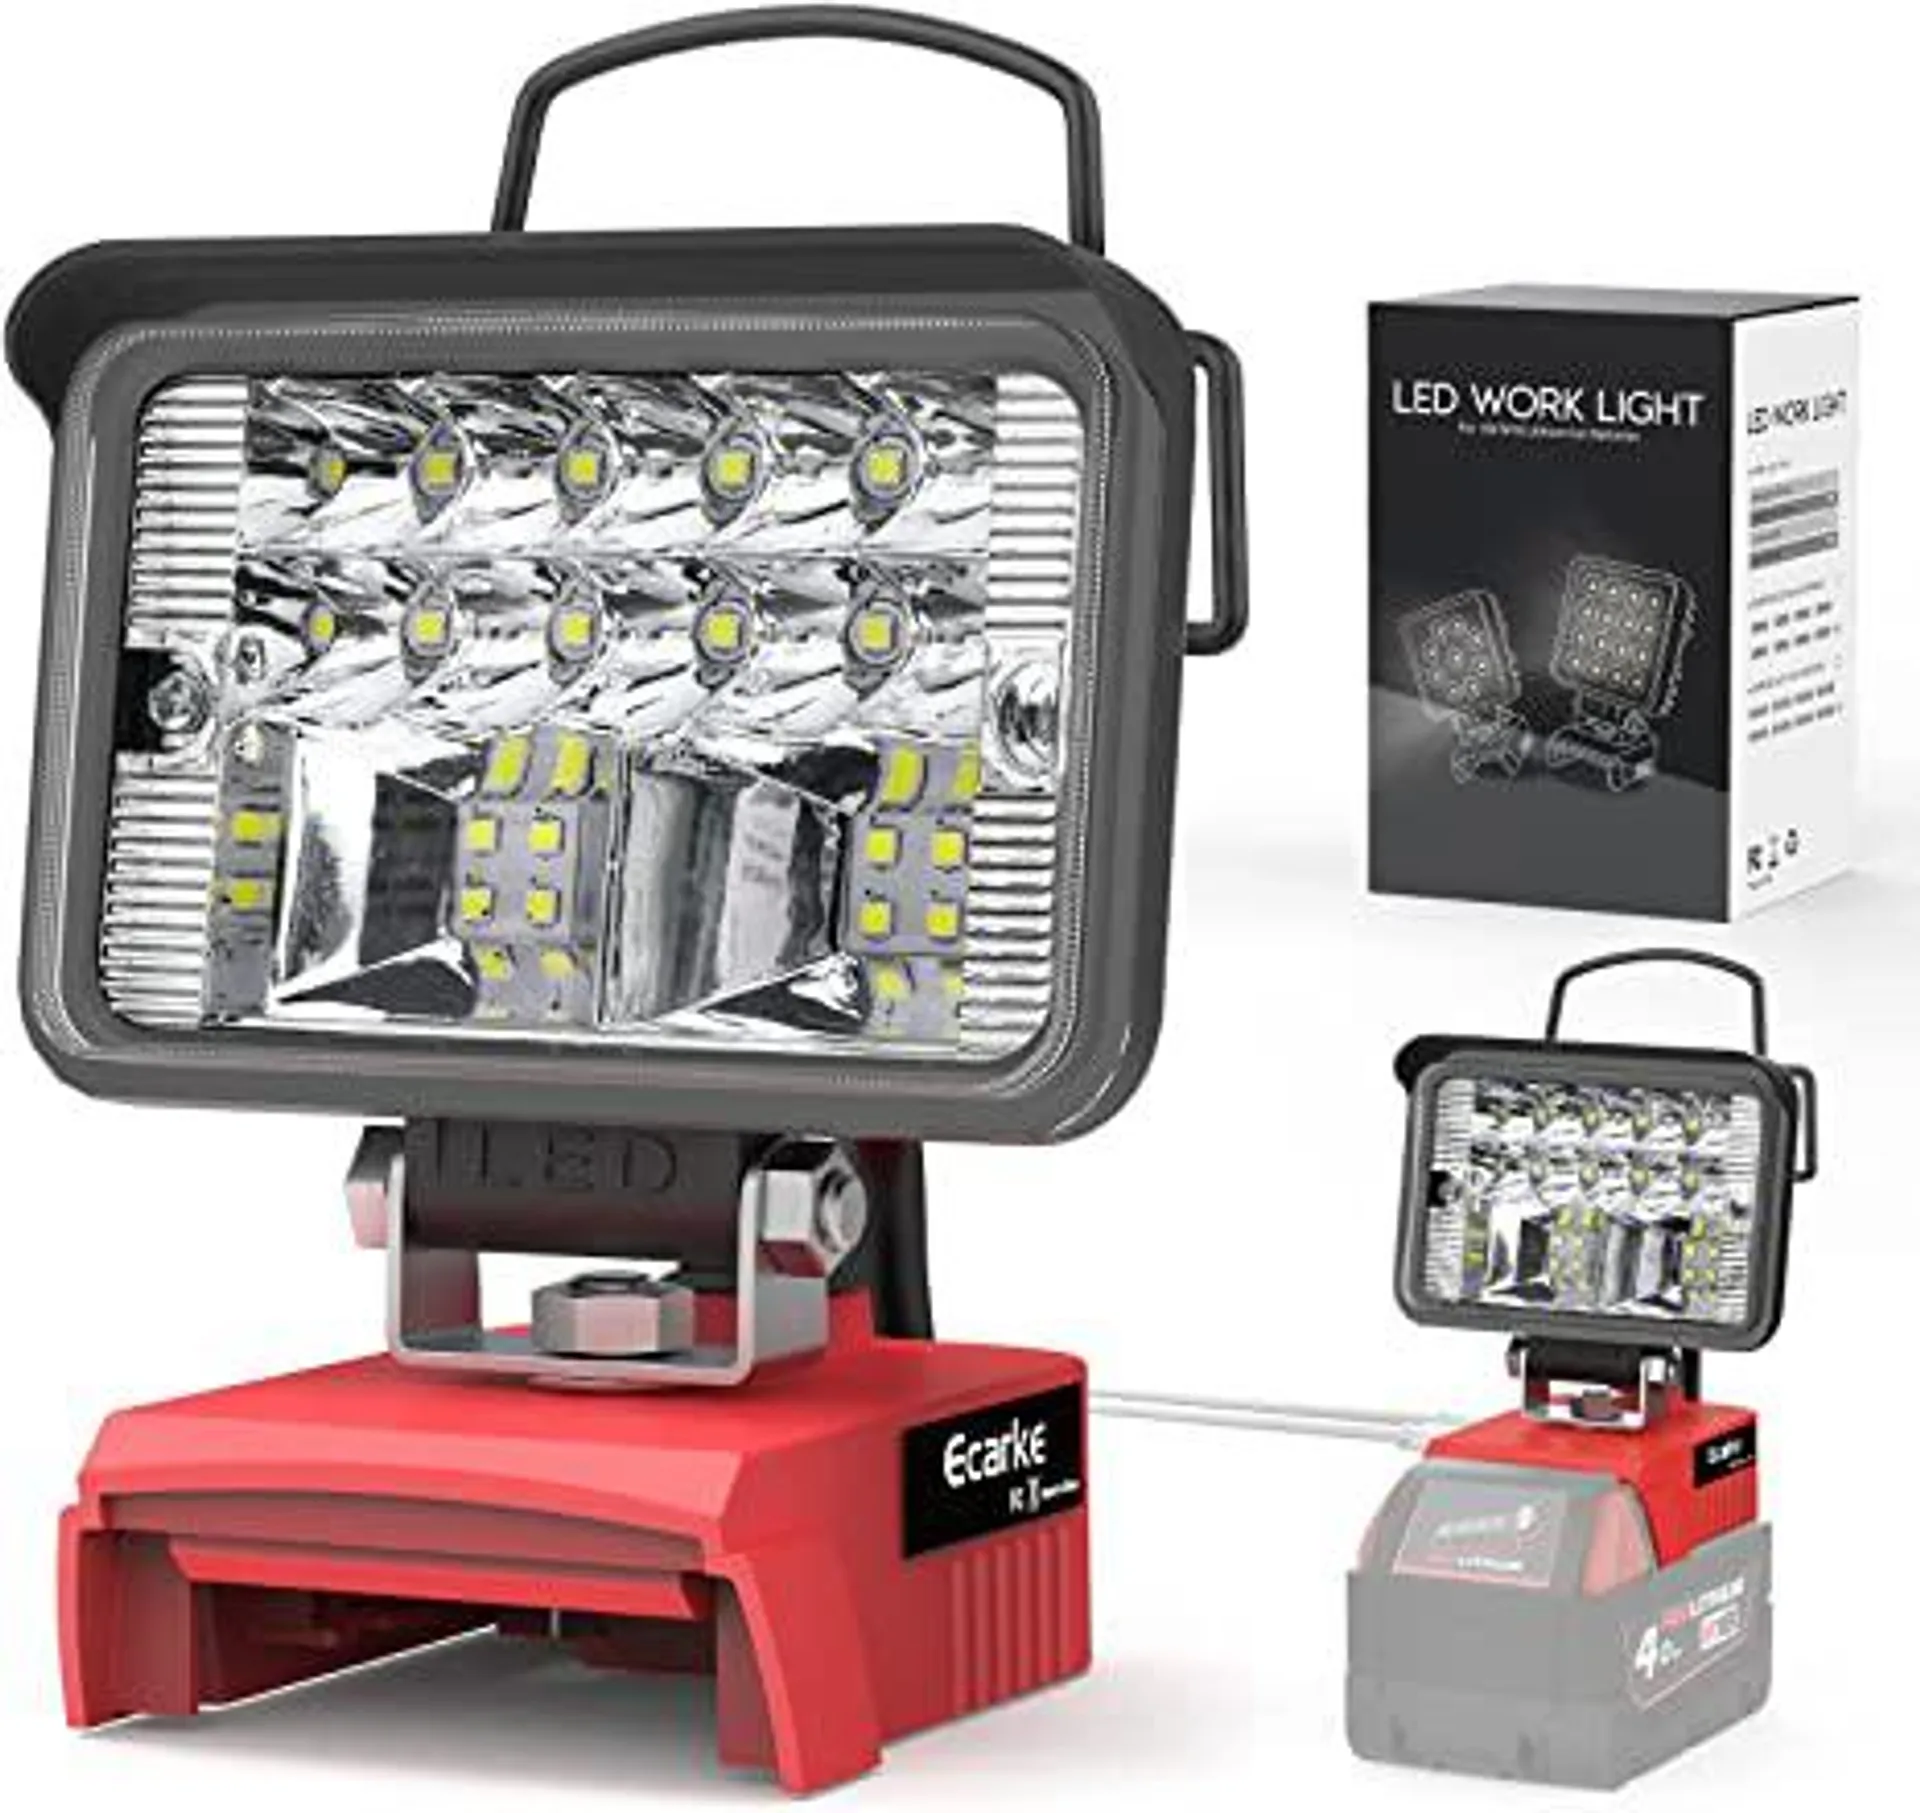 Ecarke LED Work Light Portable Flood Light for Milwaukee M18 18V Lithium Battery with USB&TYPEC Outdoor Charge &Low Voltage Protection Plate,20W Cordless Handheld Work Light Flashlight Tools(Upgraded）